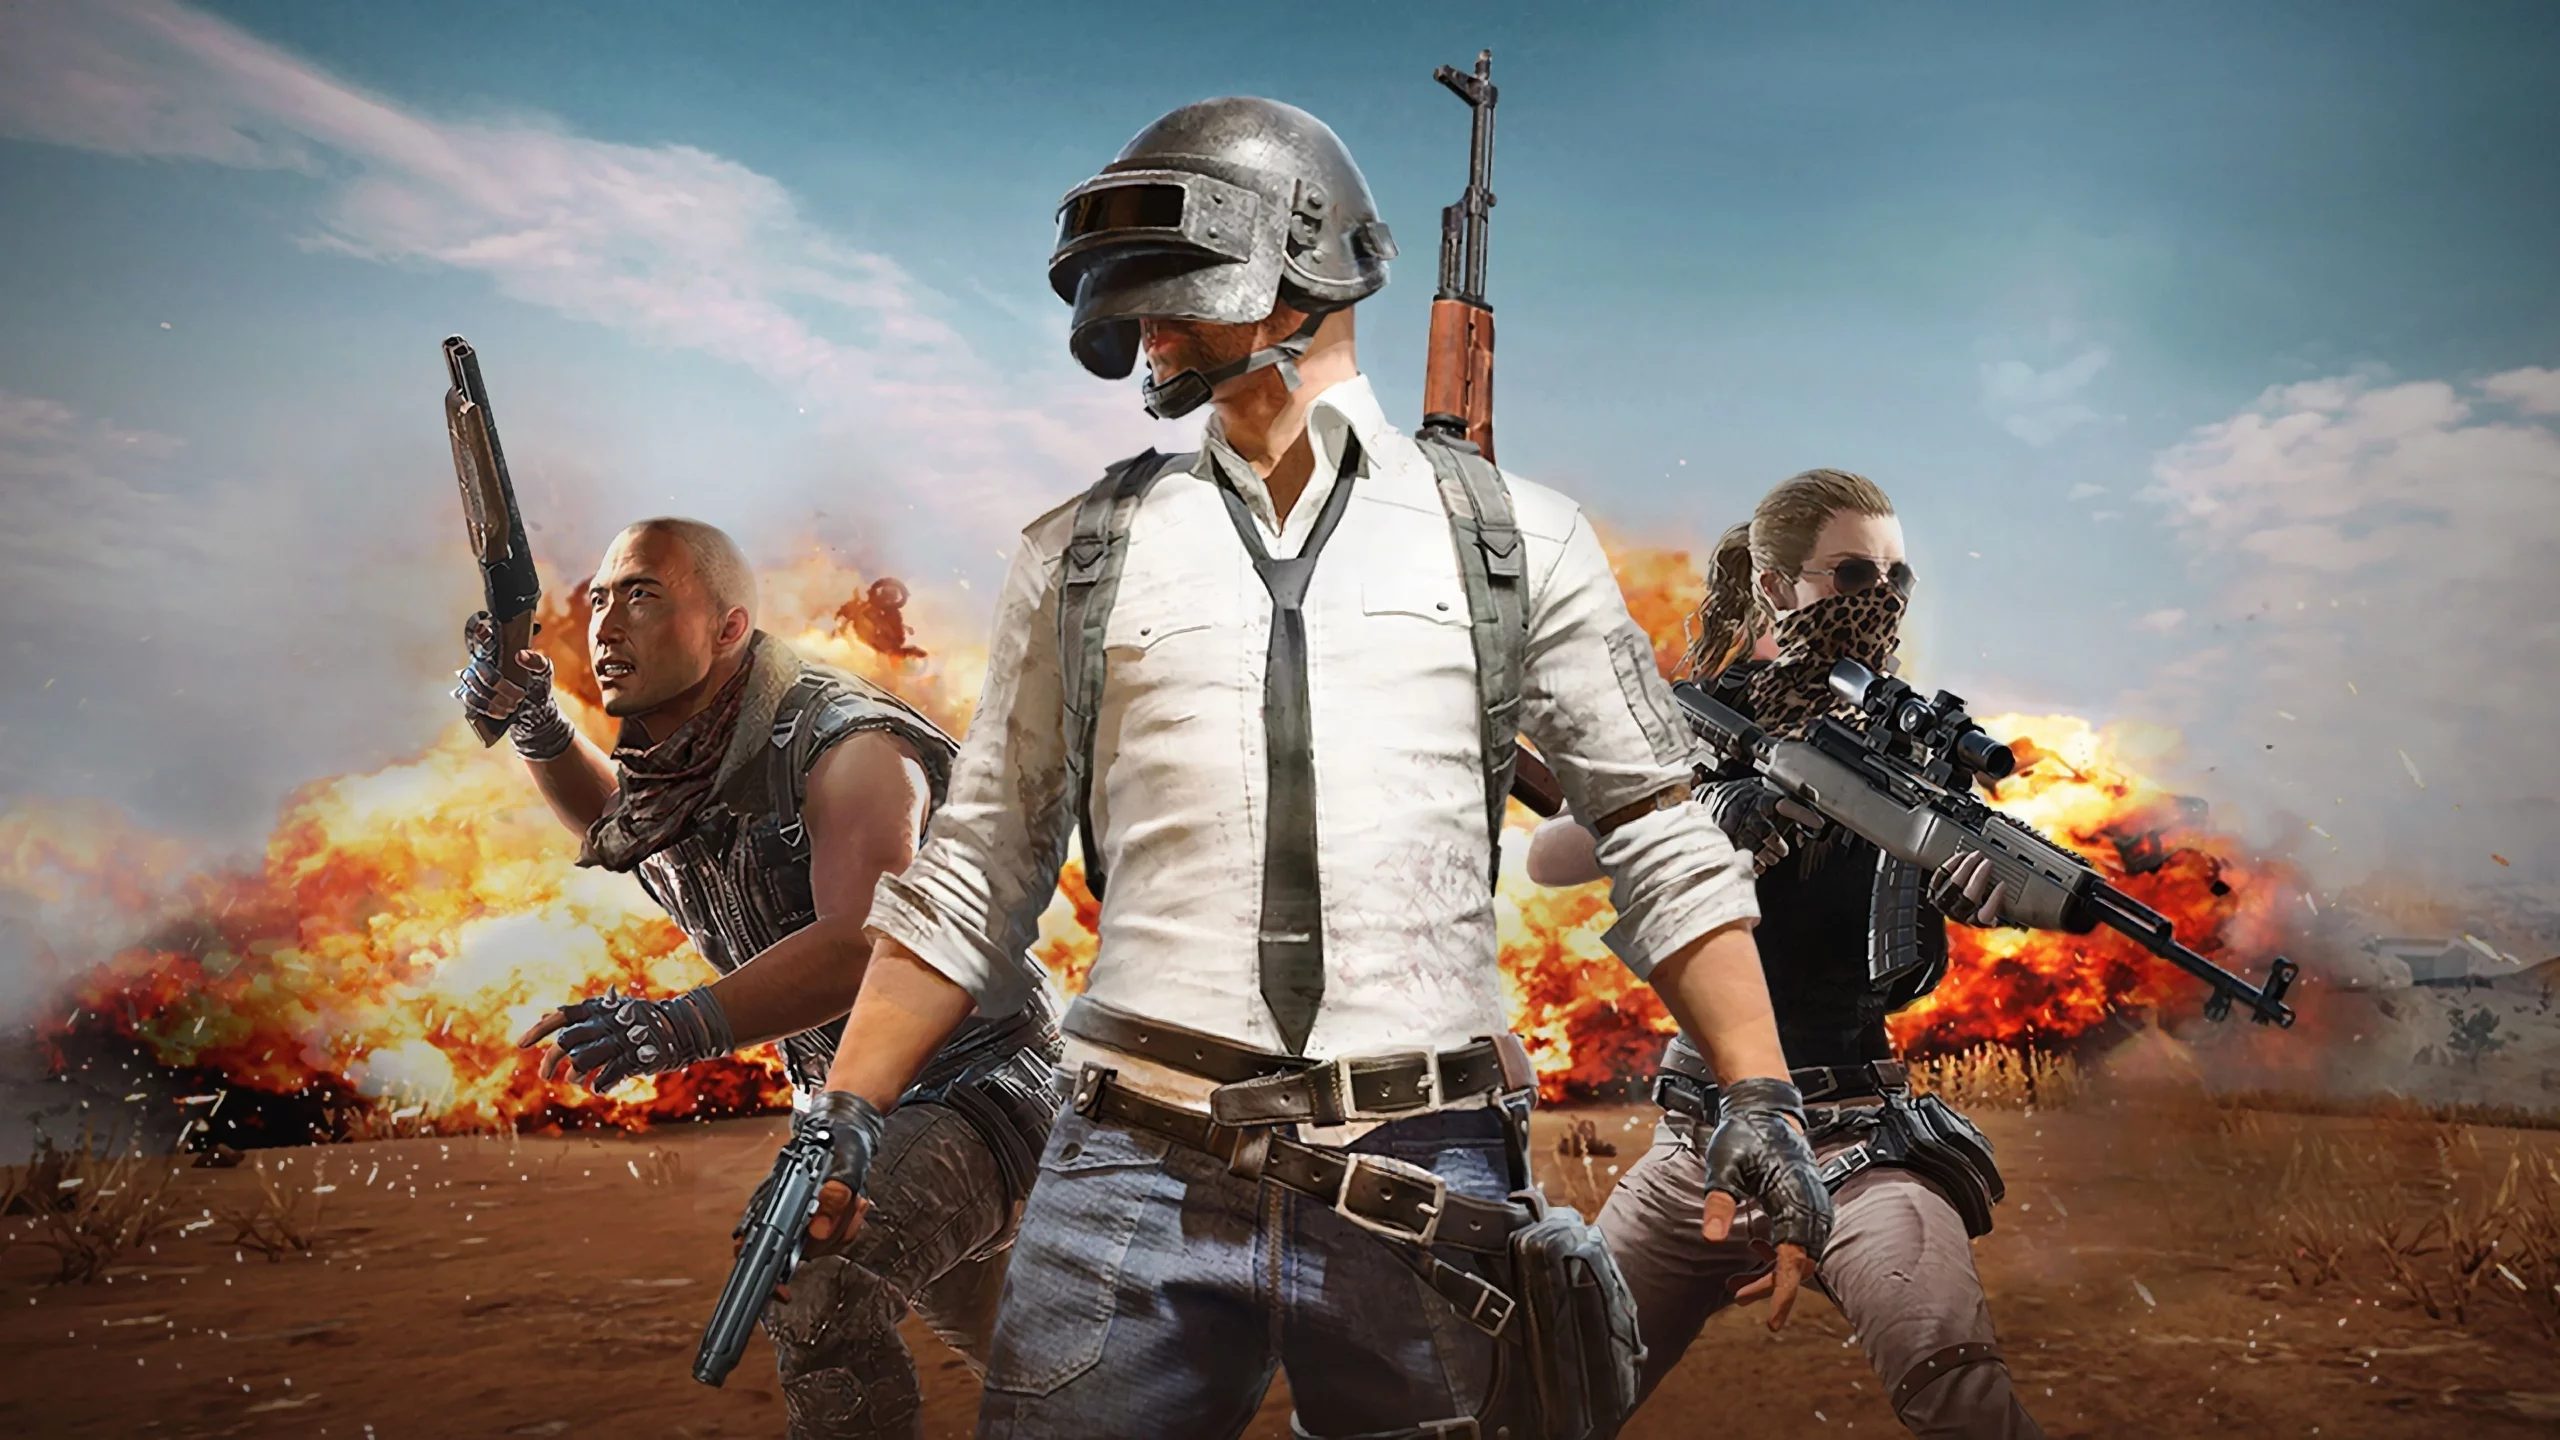 Battlegrounds Mobile India hits 100 million registered users in India